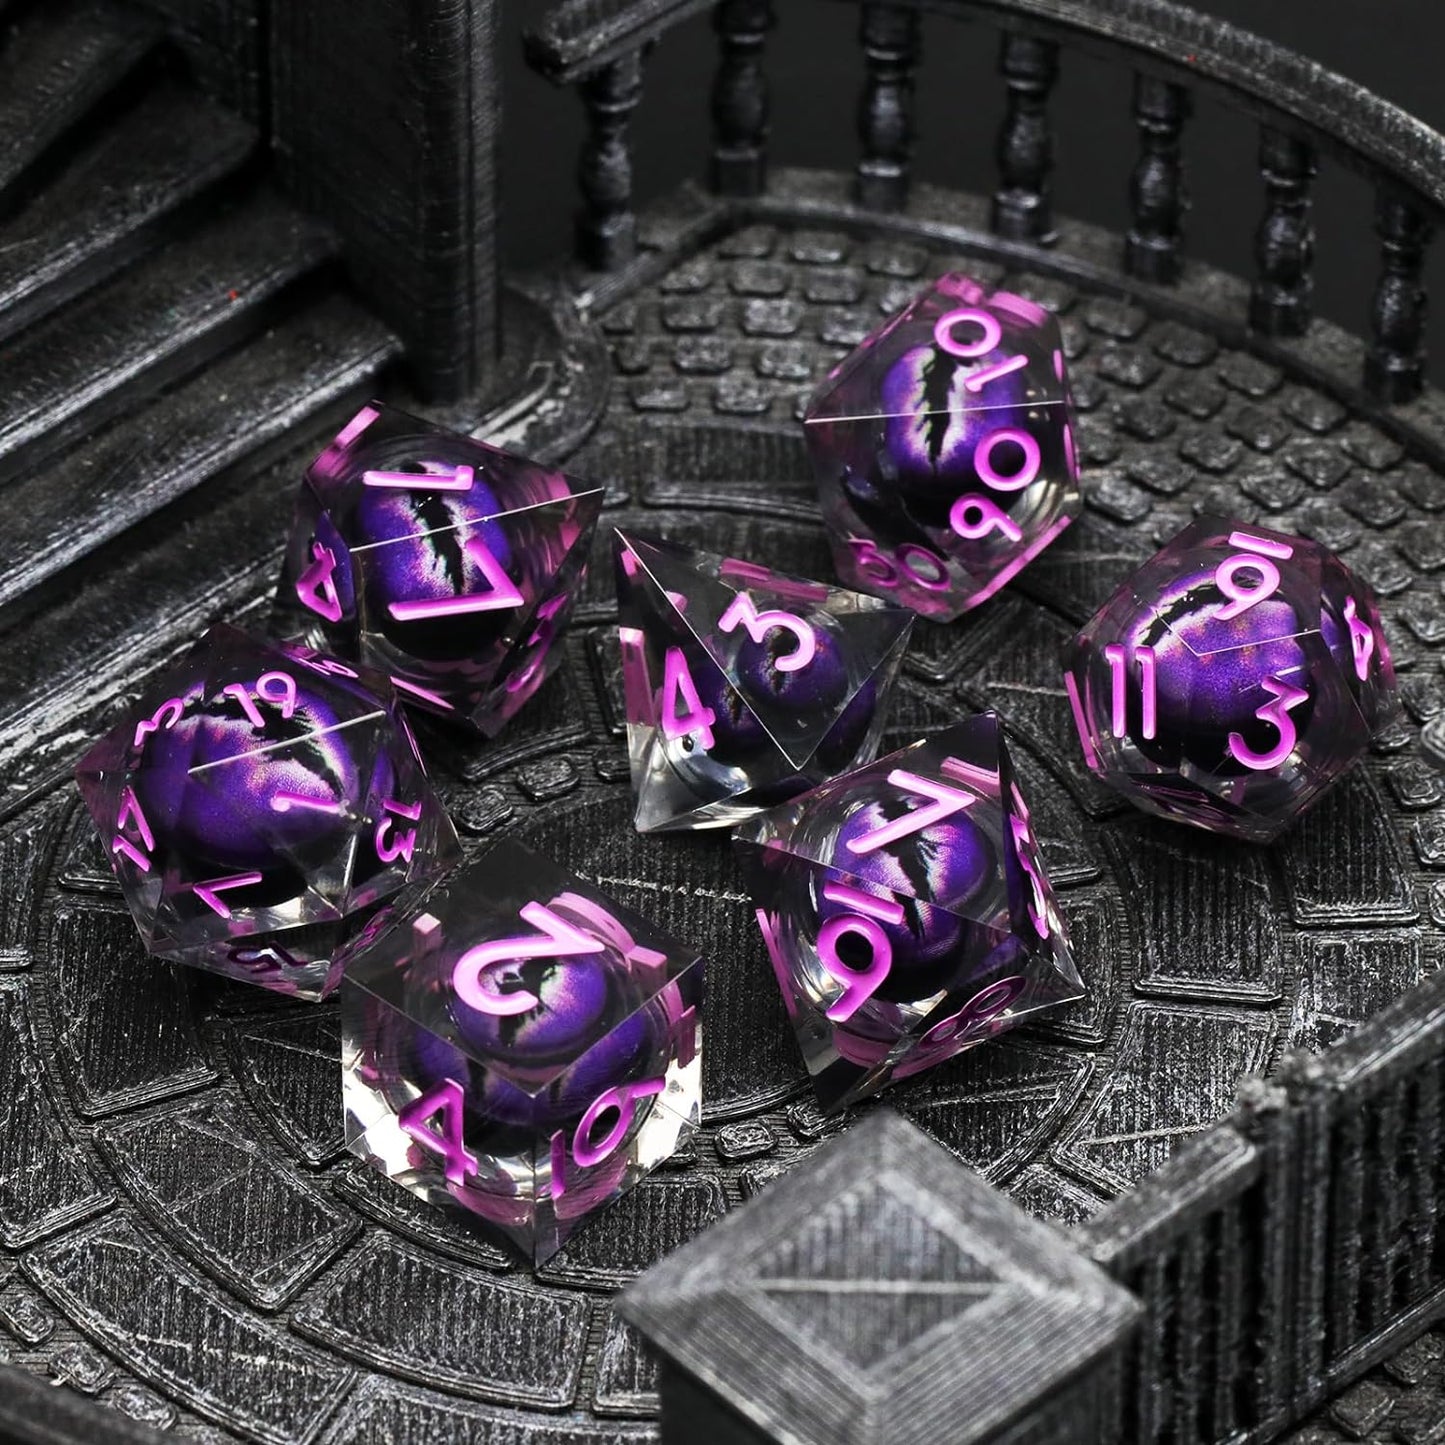 Liquid Core DND Dice, Dragon Eye Dice Set D&D Sharp Edge Resin Dungeons and Dragons Dice Polyhedral Beholder's Ttrpg Dice (light purple)